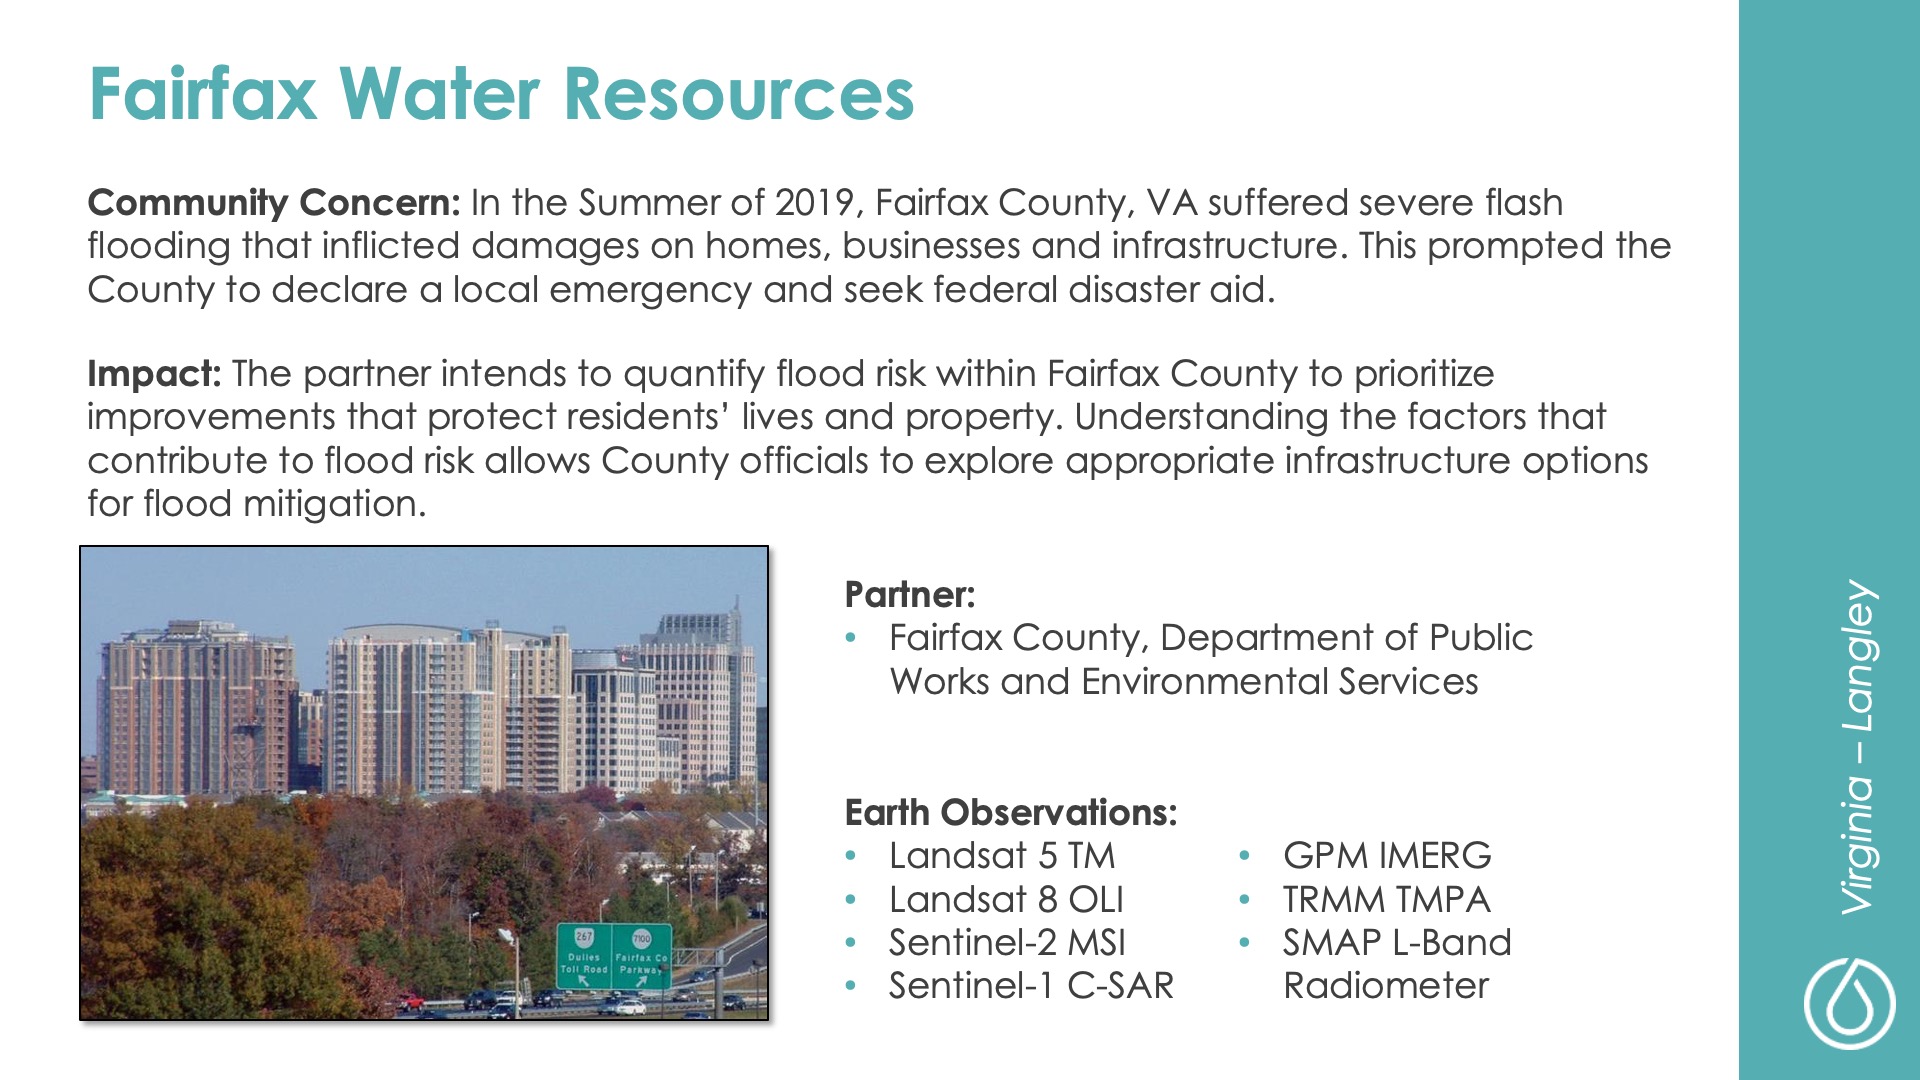 Slide title: Fairfax Water ResourcesDEVELOP Node: Virginia - LangleyCommunity Concern: In the Summer of 2019, Fairfax County, VA suffered severe flash flooding that inflicted damages on homes, businesses and infrastructure. This prompted the County to declare a local emergency and seek federal disaster aid.Impact: The partner intends to quantify flood risk within Fairfax County to prioritize improvements that protect residents’ lives and property. Understanding the factors that contribute to flood risk allows County officials to explore appropriate infrastructure options for flood mitigation.Partner: Fairfax County, Department of Public Works and Environmental ServicesEarth Observations: Landsat 5 TM, Landsat 8 OLI, Sentinel-2 MSI, Sentinel-1 C-SAR, GPM IMERG, TRMM TMPA, SMAP L-Band Radiometer